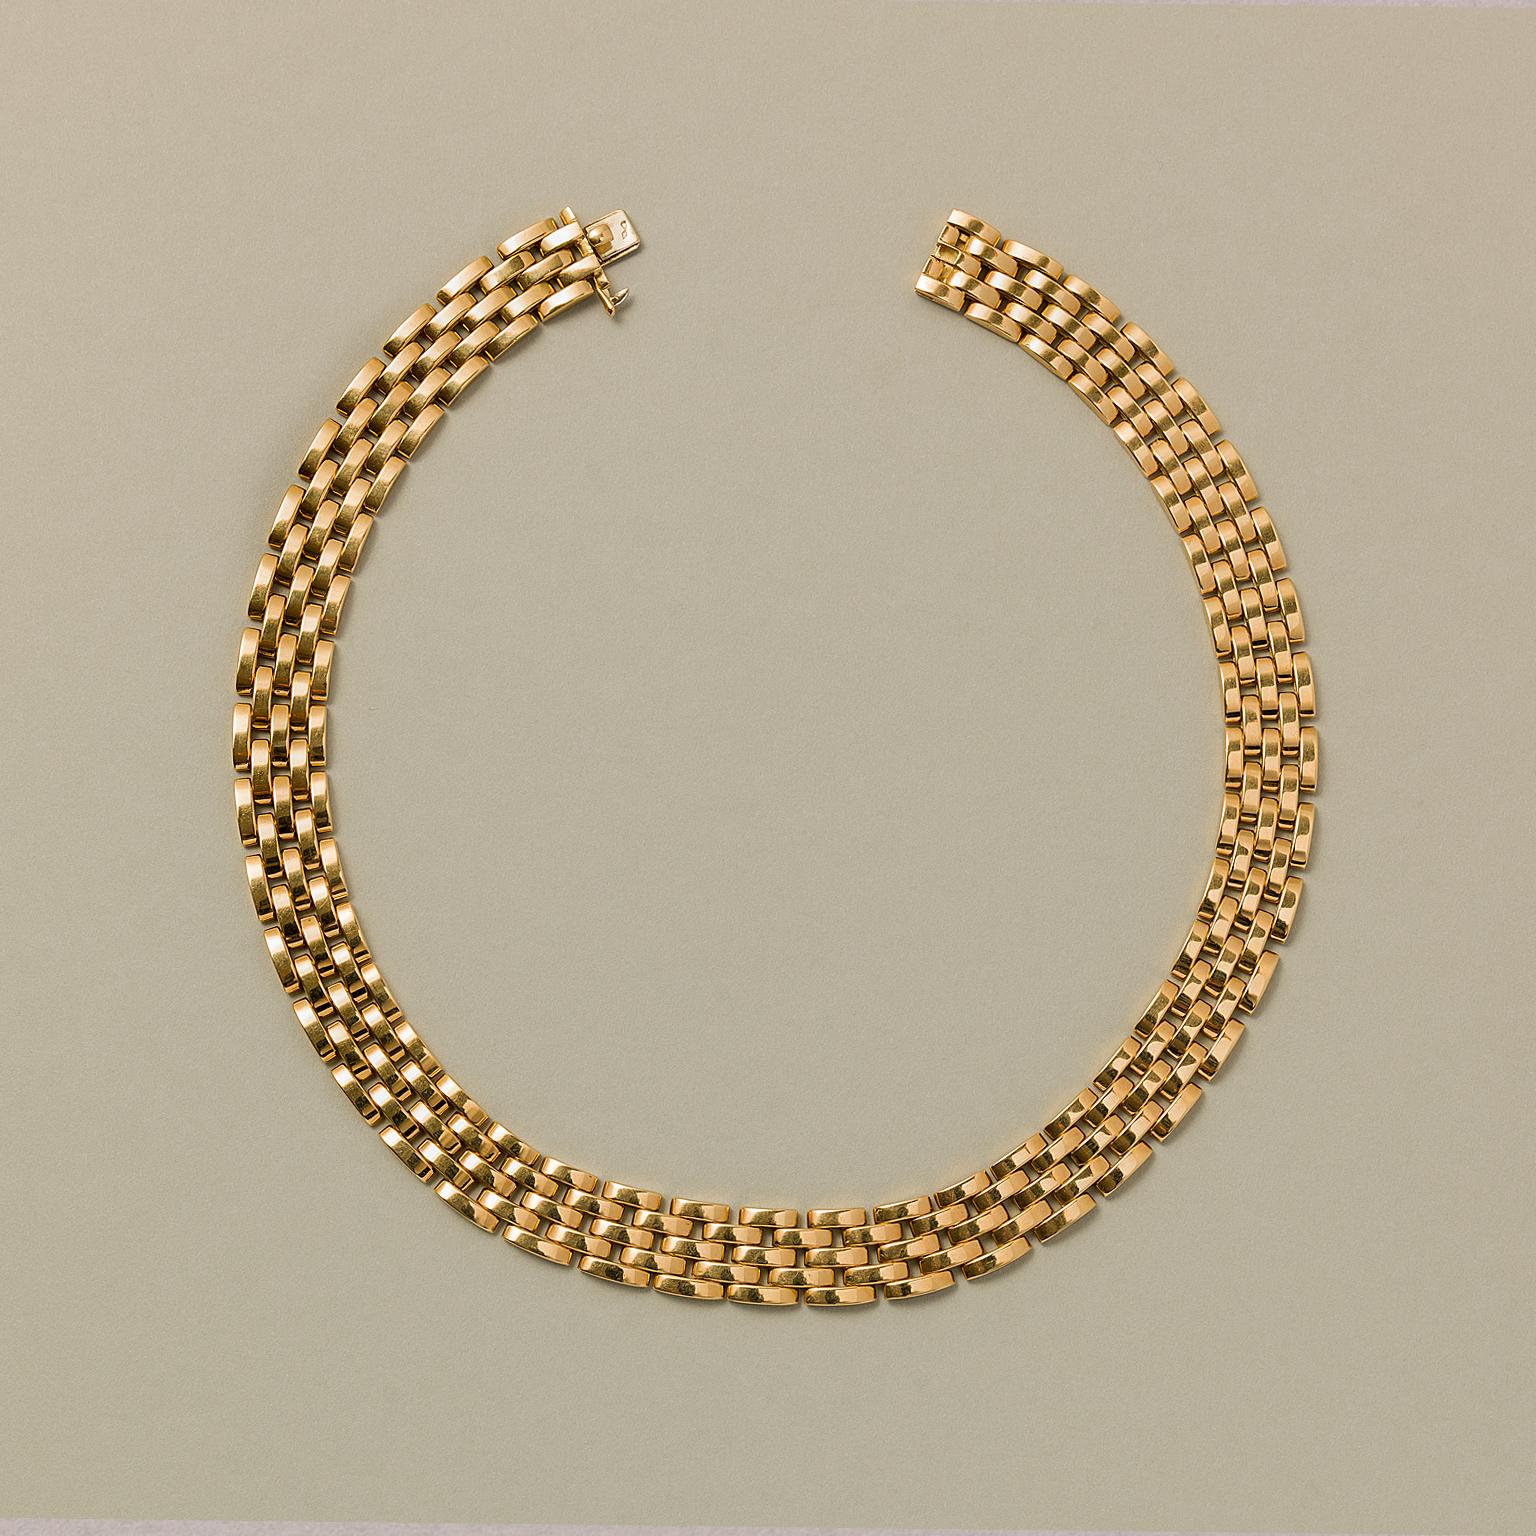 An 18 carat gold necklace, Panthère model, classic five-row choker necklace with a grain de riz pattern, signed and numbered: Cartier, 632144, French.

weight: 137.88 grams
length: 43 cm
width: 14 mm
